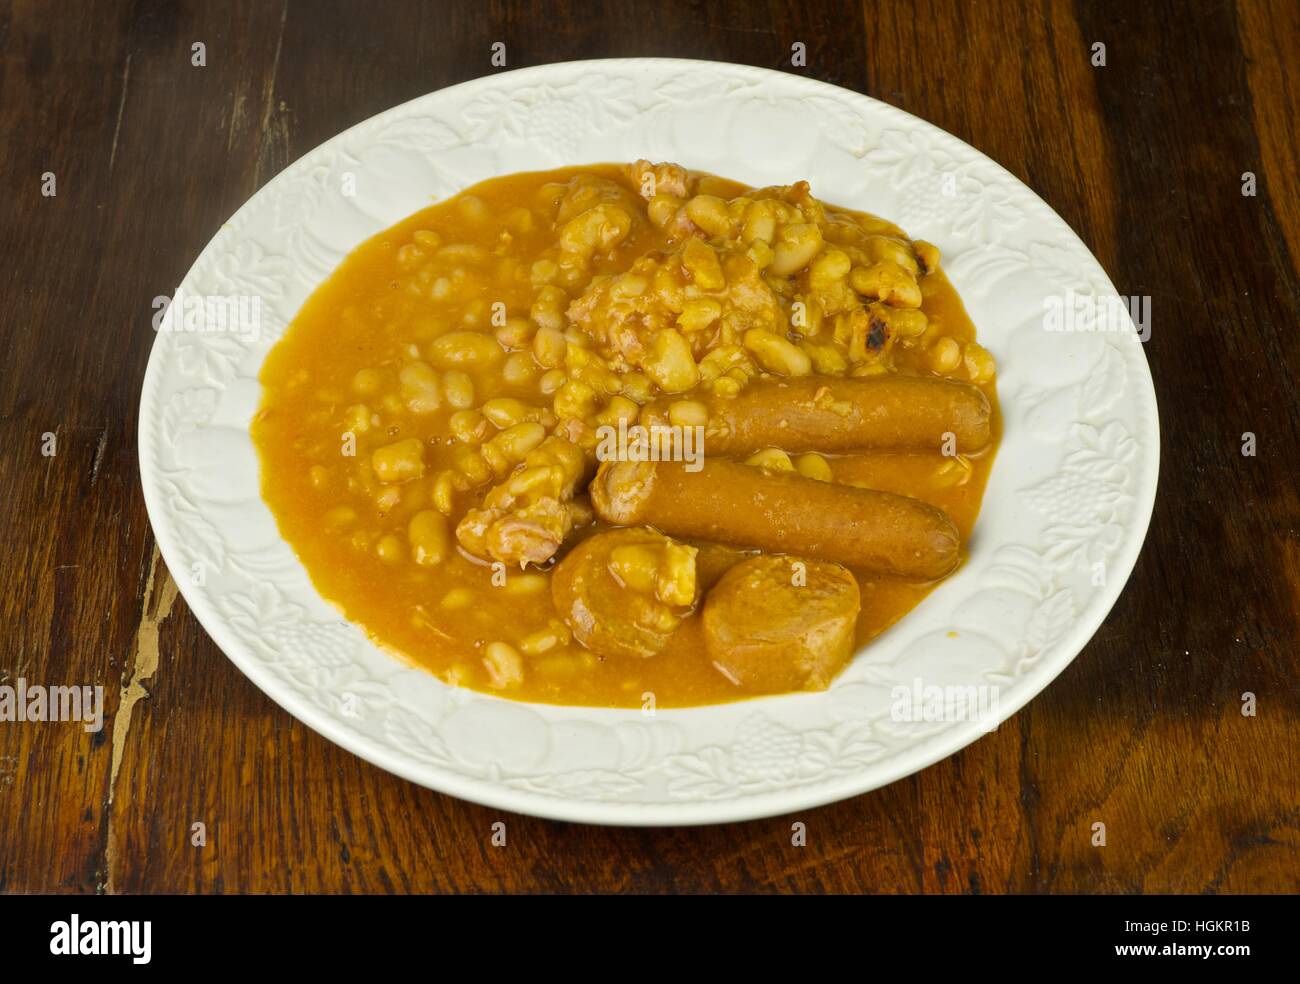 A plate of cassoulet, typical french dish Stock Photo